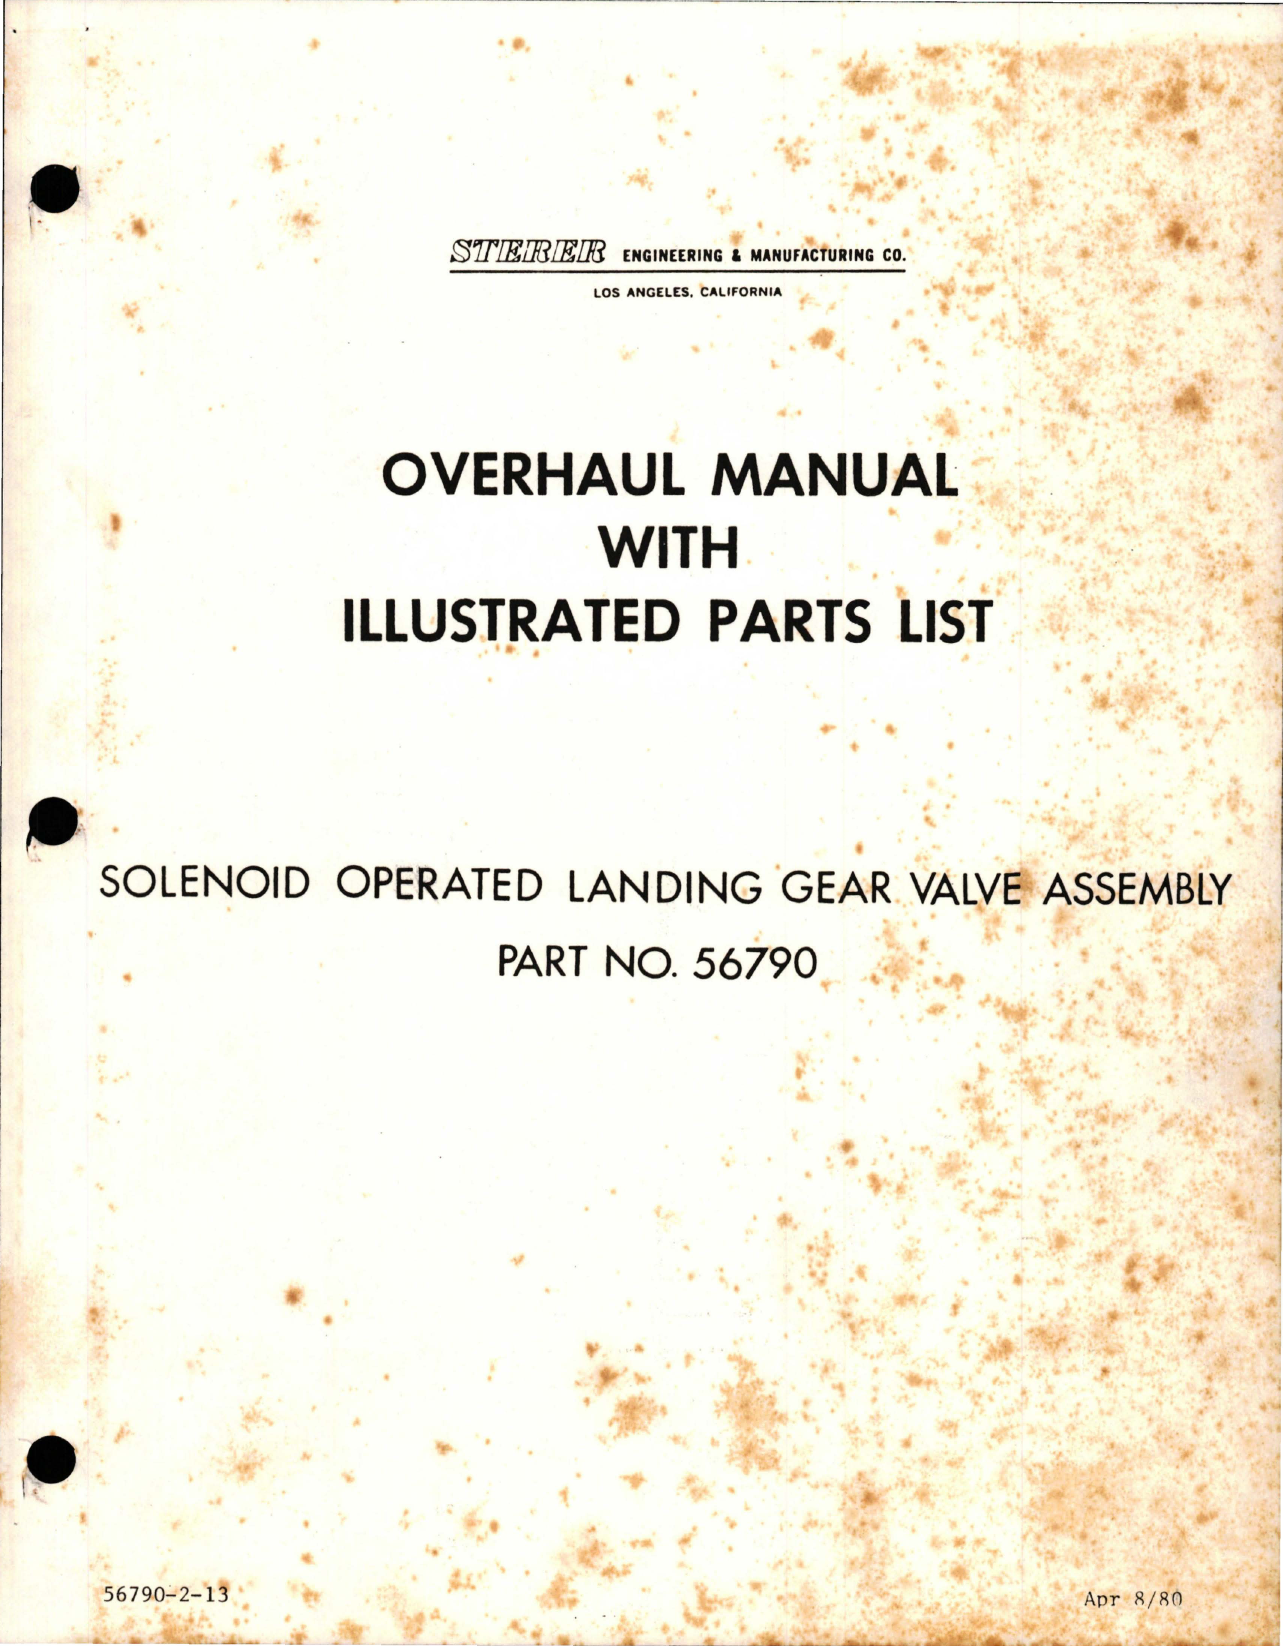 Sample page 1 from AirCorps Library document: Overhaul with Illustrated Parts List for Solenoid Operated Landing Gear Valve Assembly - Part 56790